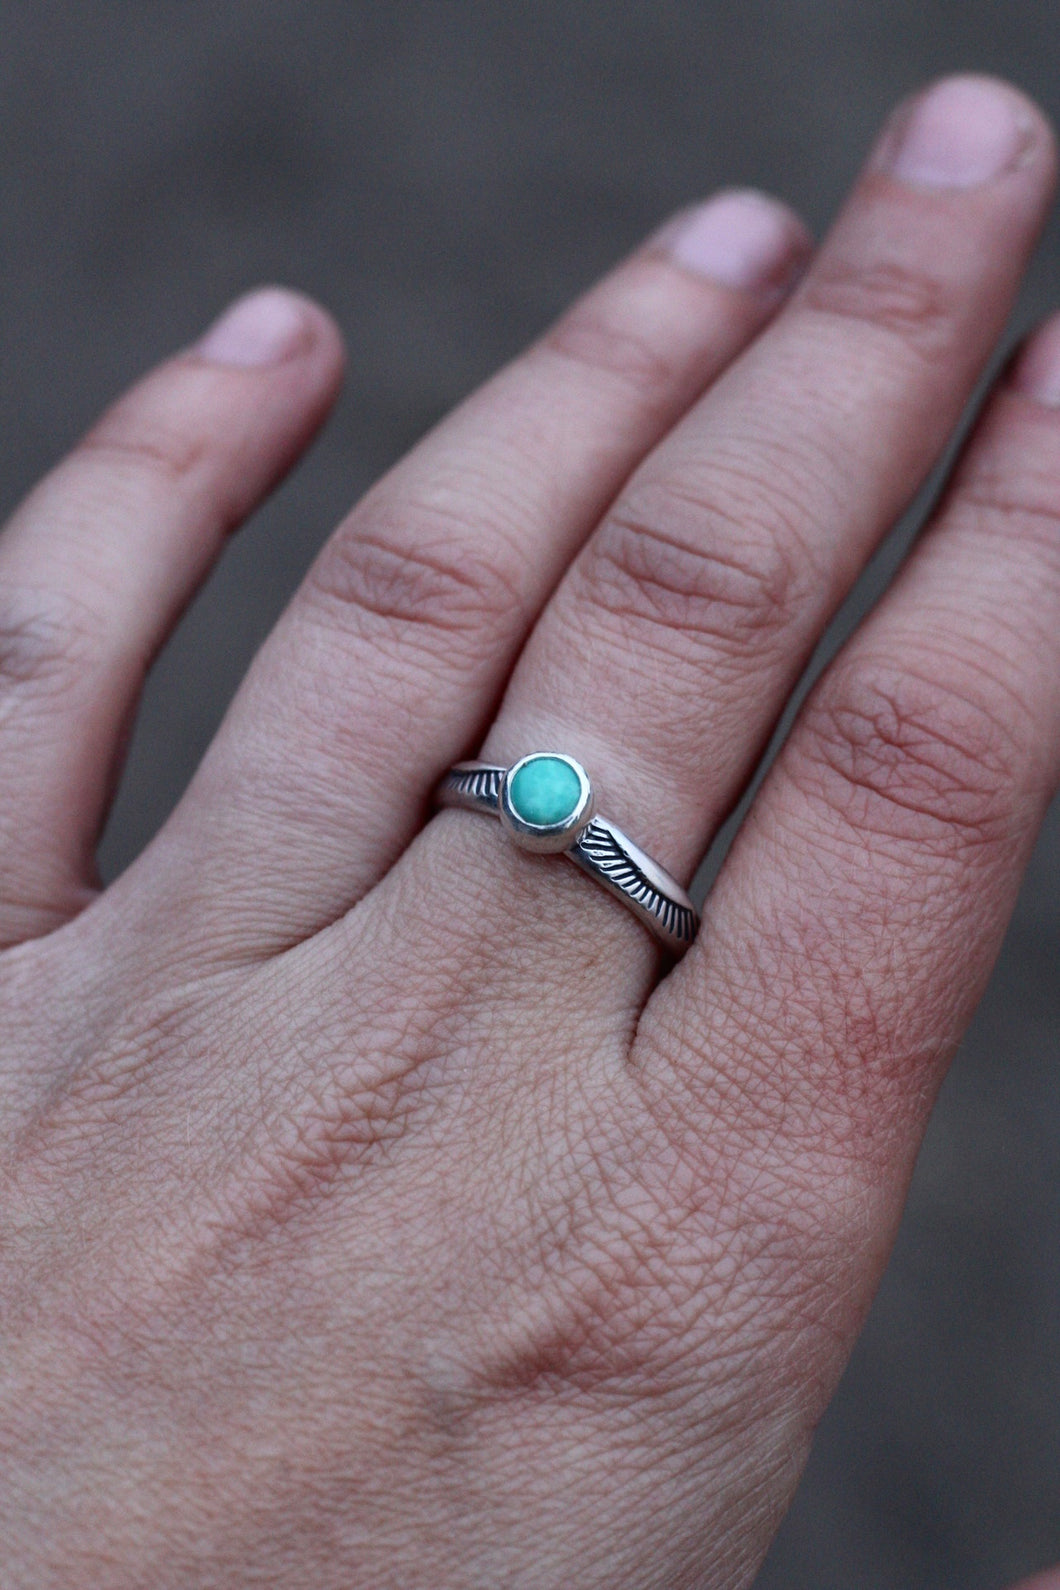 Turquoise ring - size 8.25